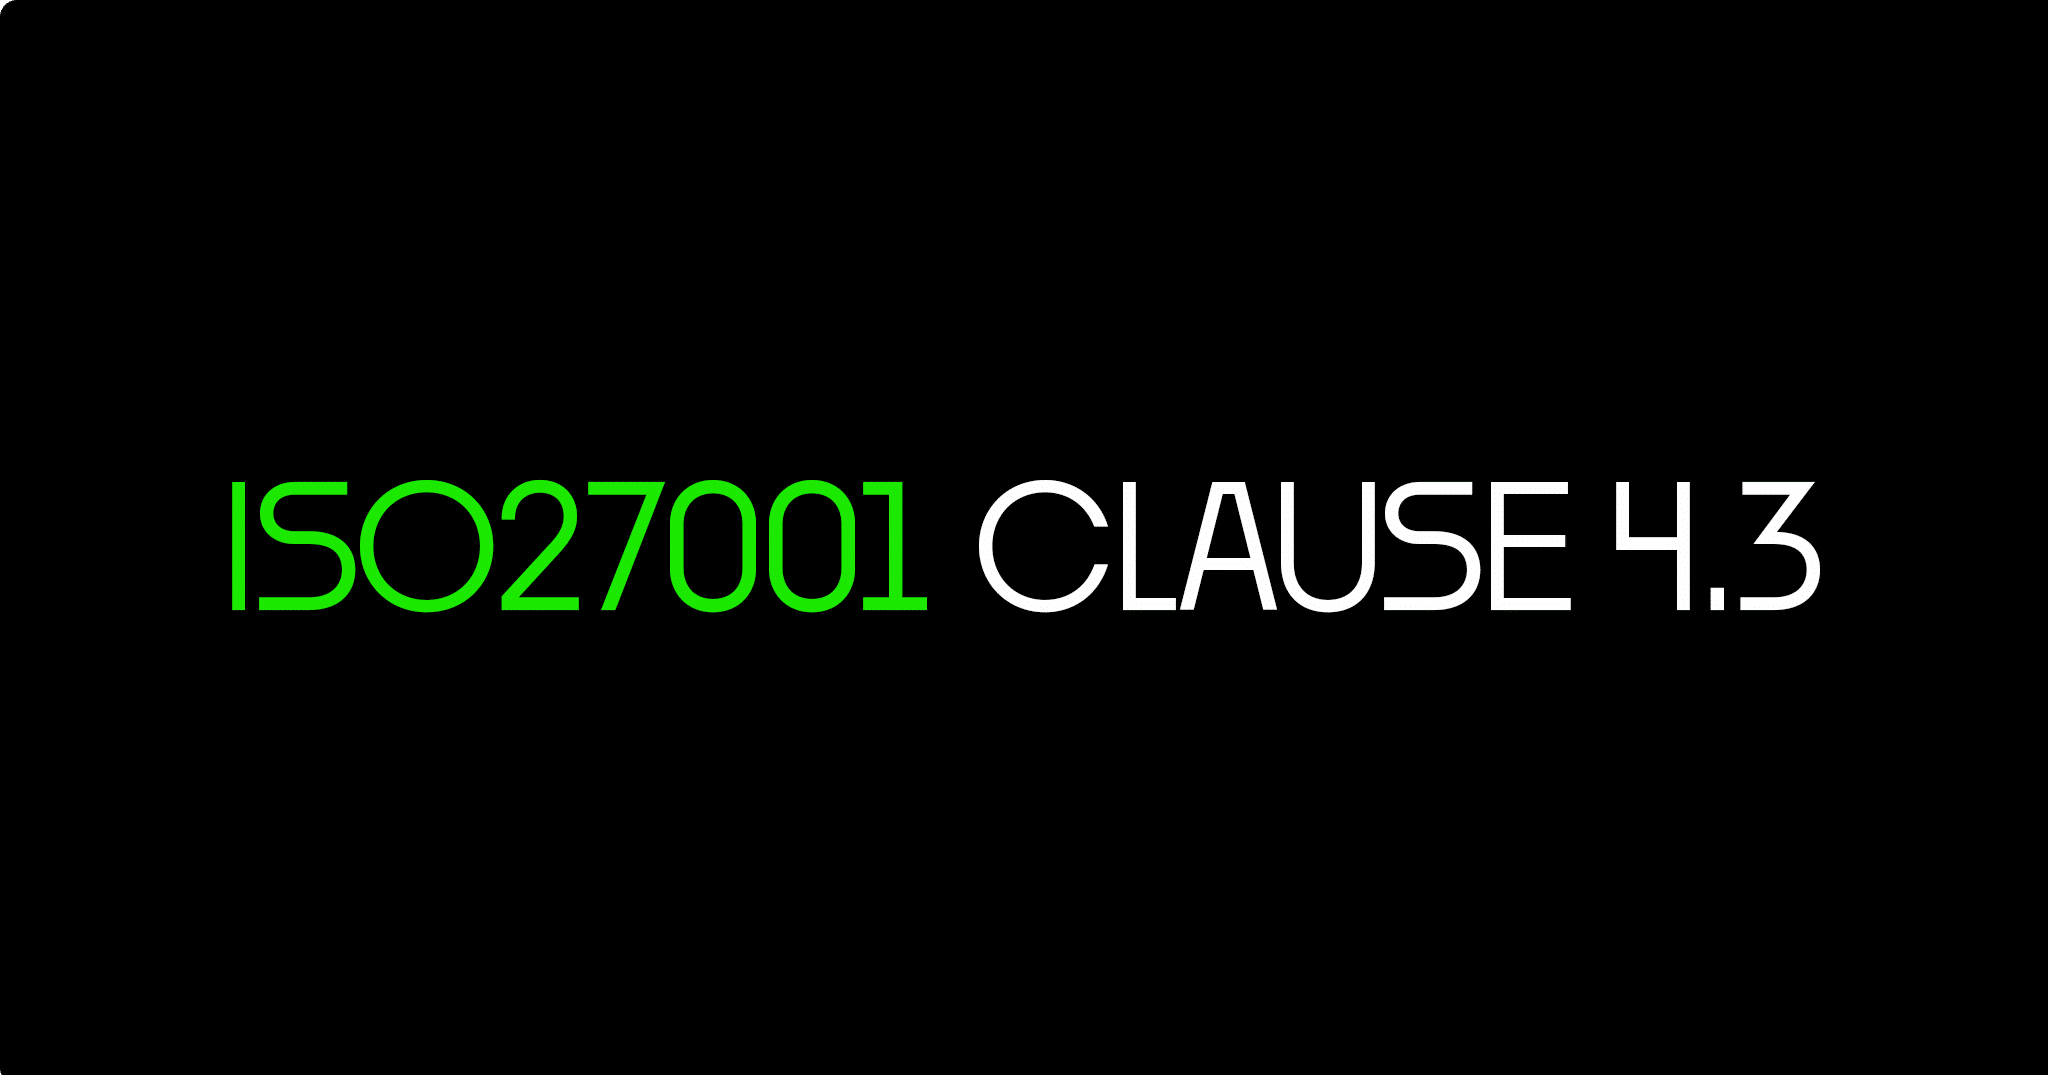 ISO 27001 Clause 4.3 Determining The Scope Of The Information Security Management System Certification Guide